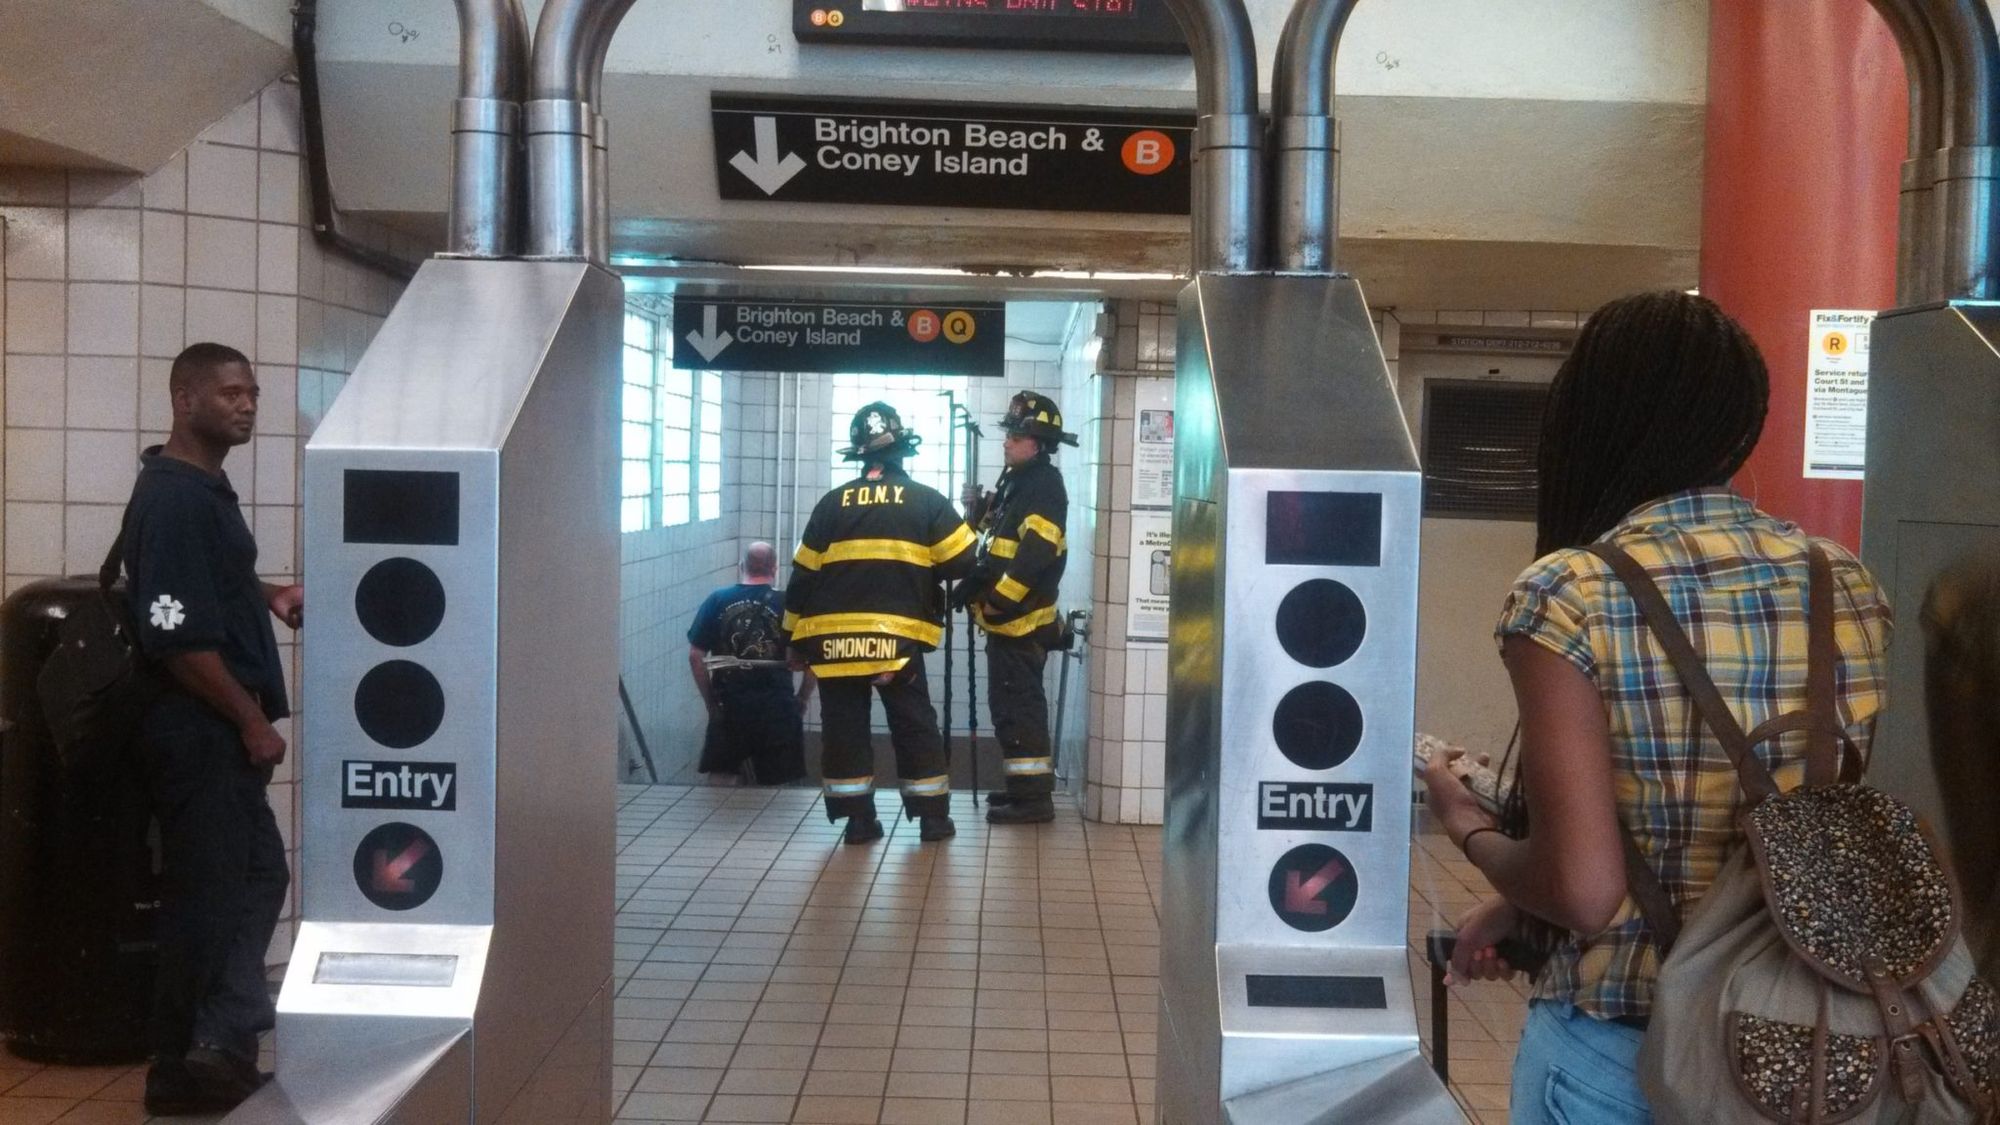 Updated: Q Service Resumes, With Delays, After Track Fire At The Church Avenue B/Q Subway Station